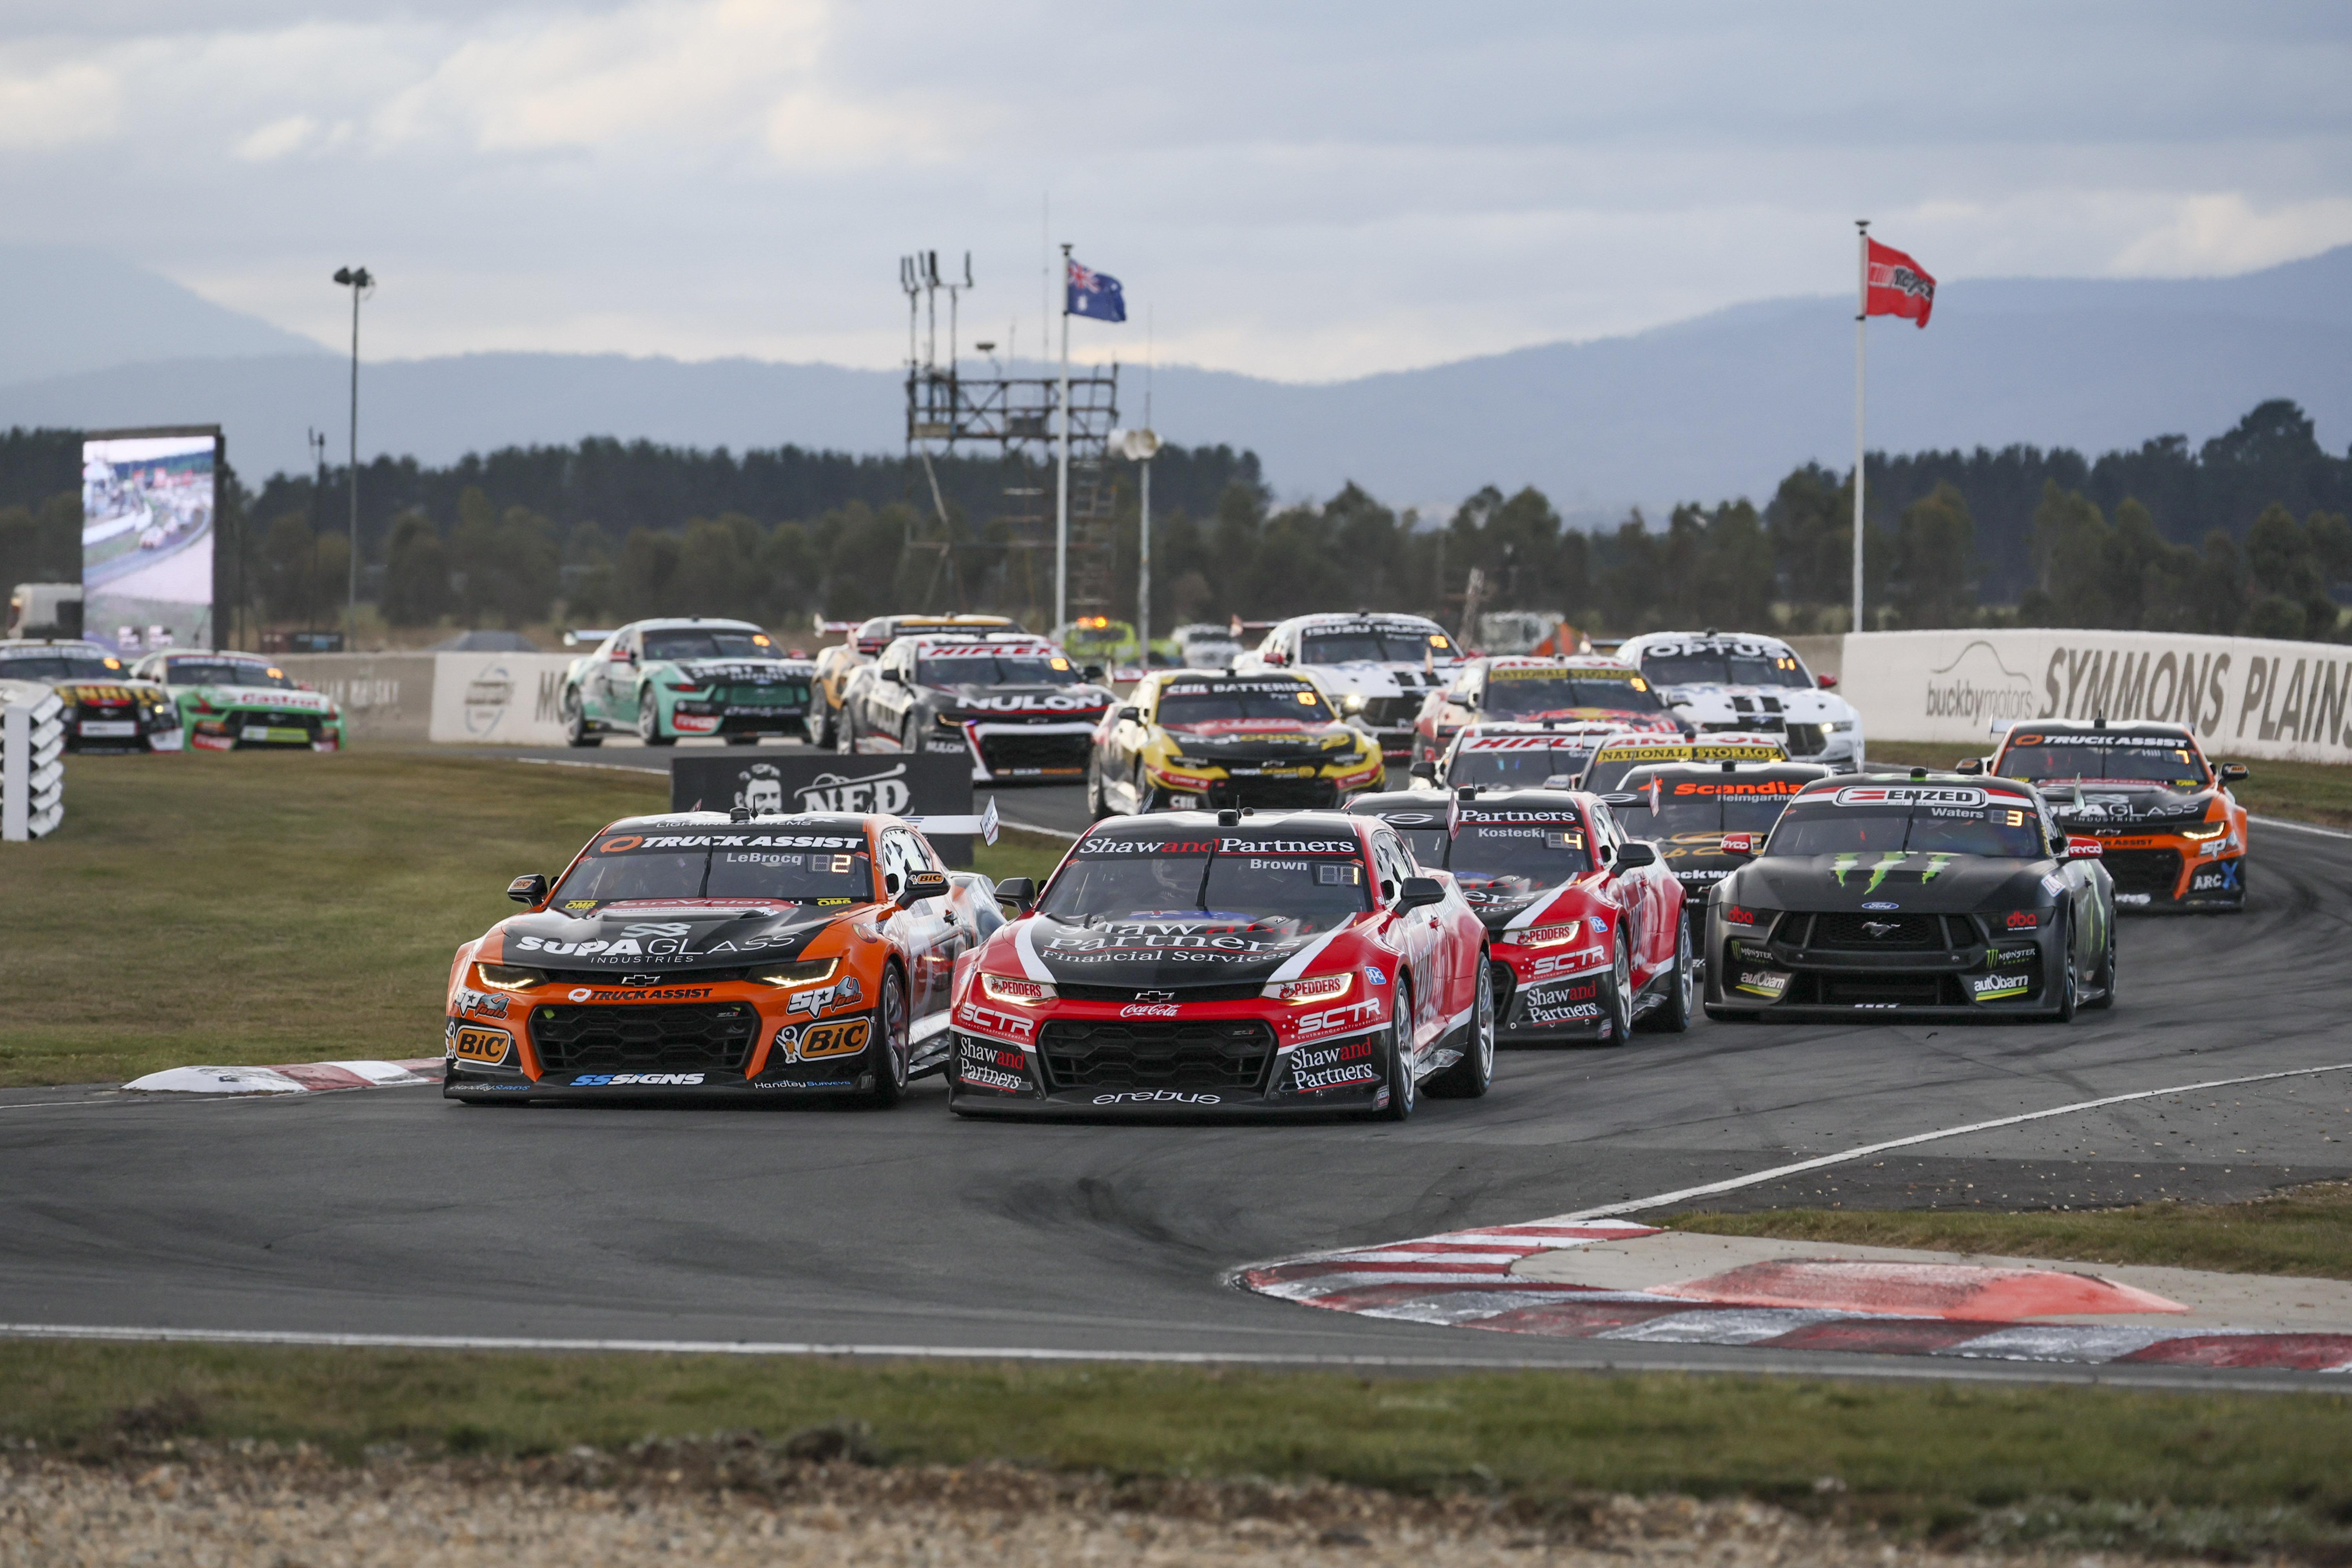 Will Brown wins in Tasmania as disaster strikes for championship protagonists